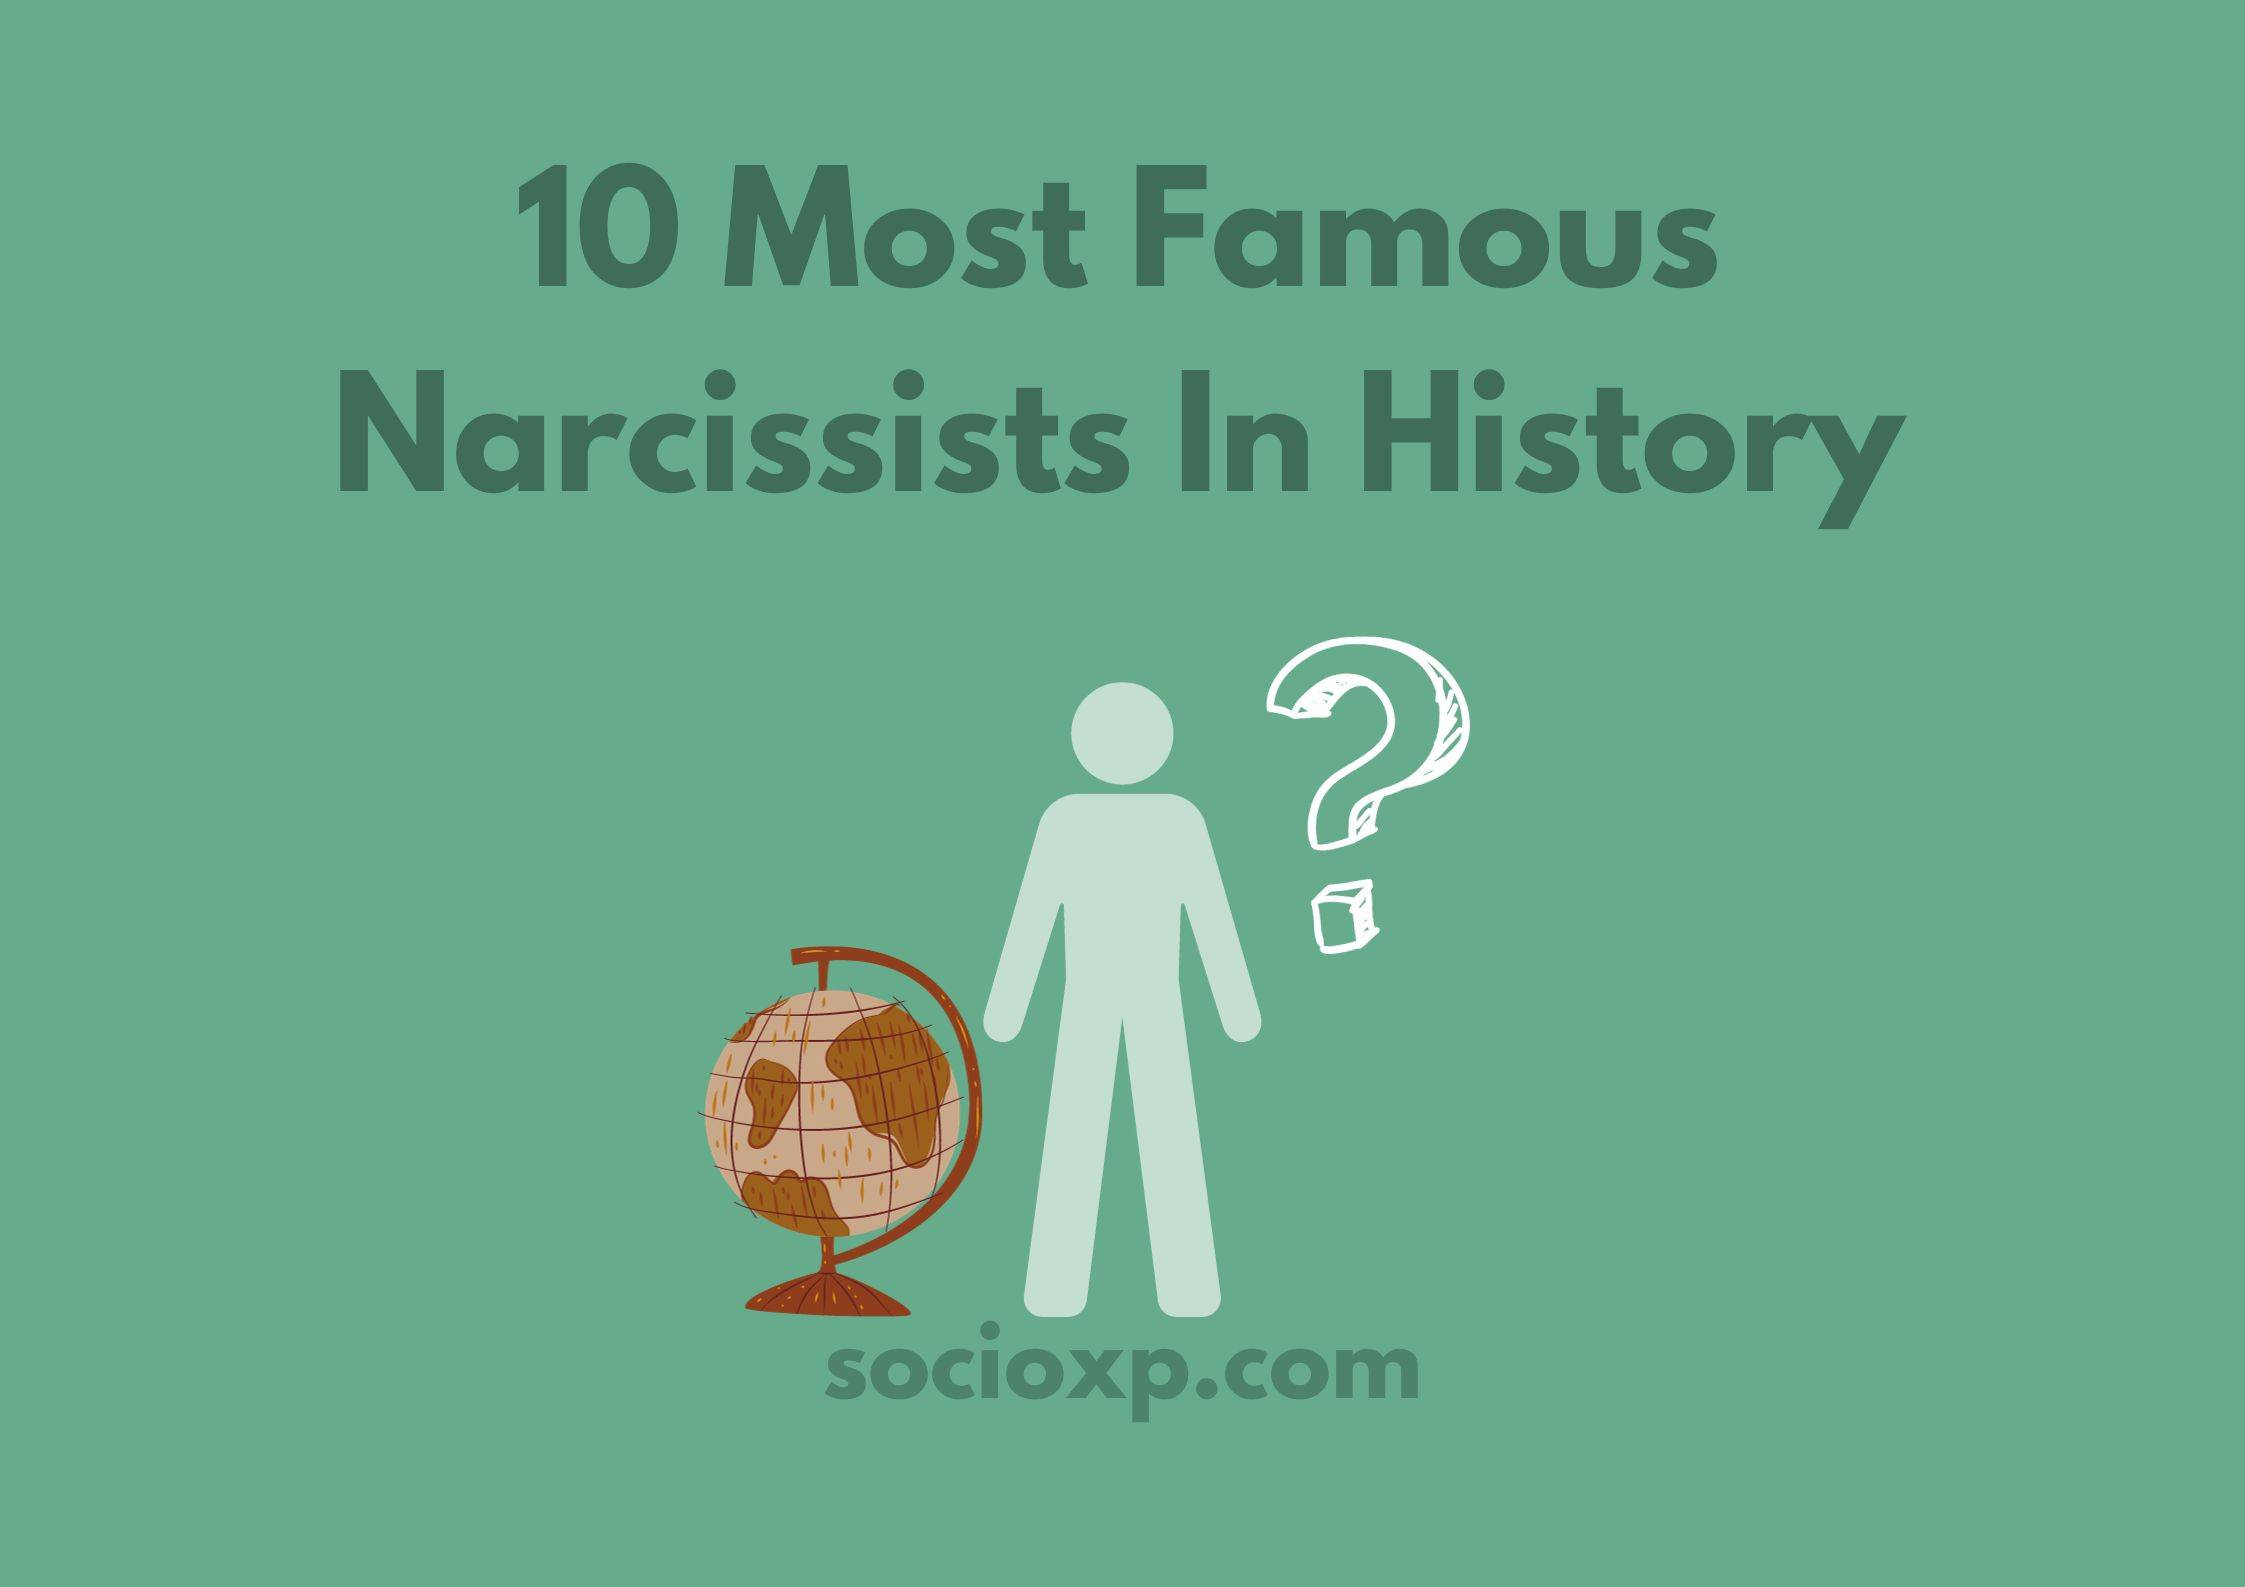 10 Most Famous Narcissists In History